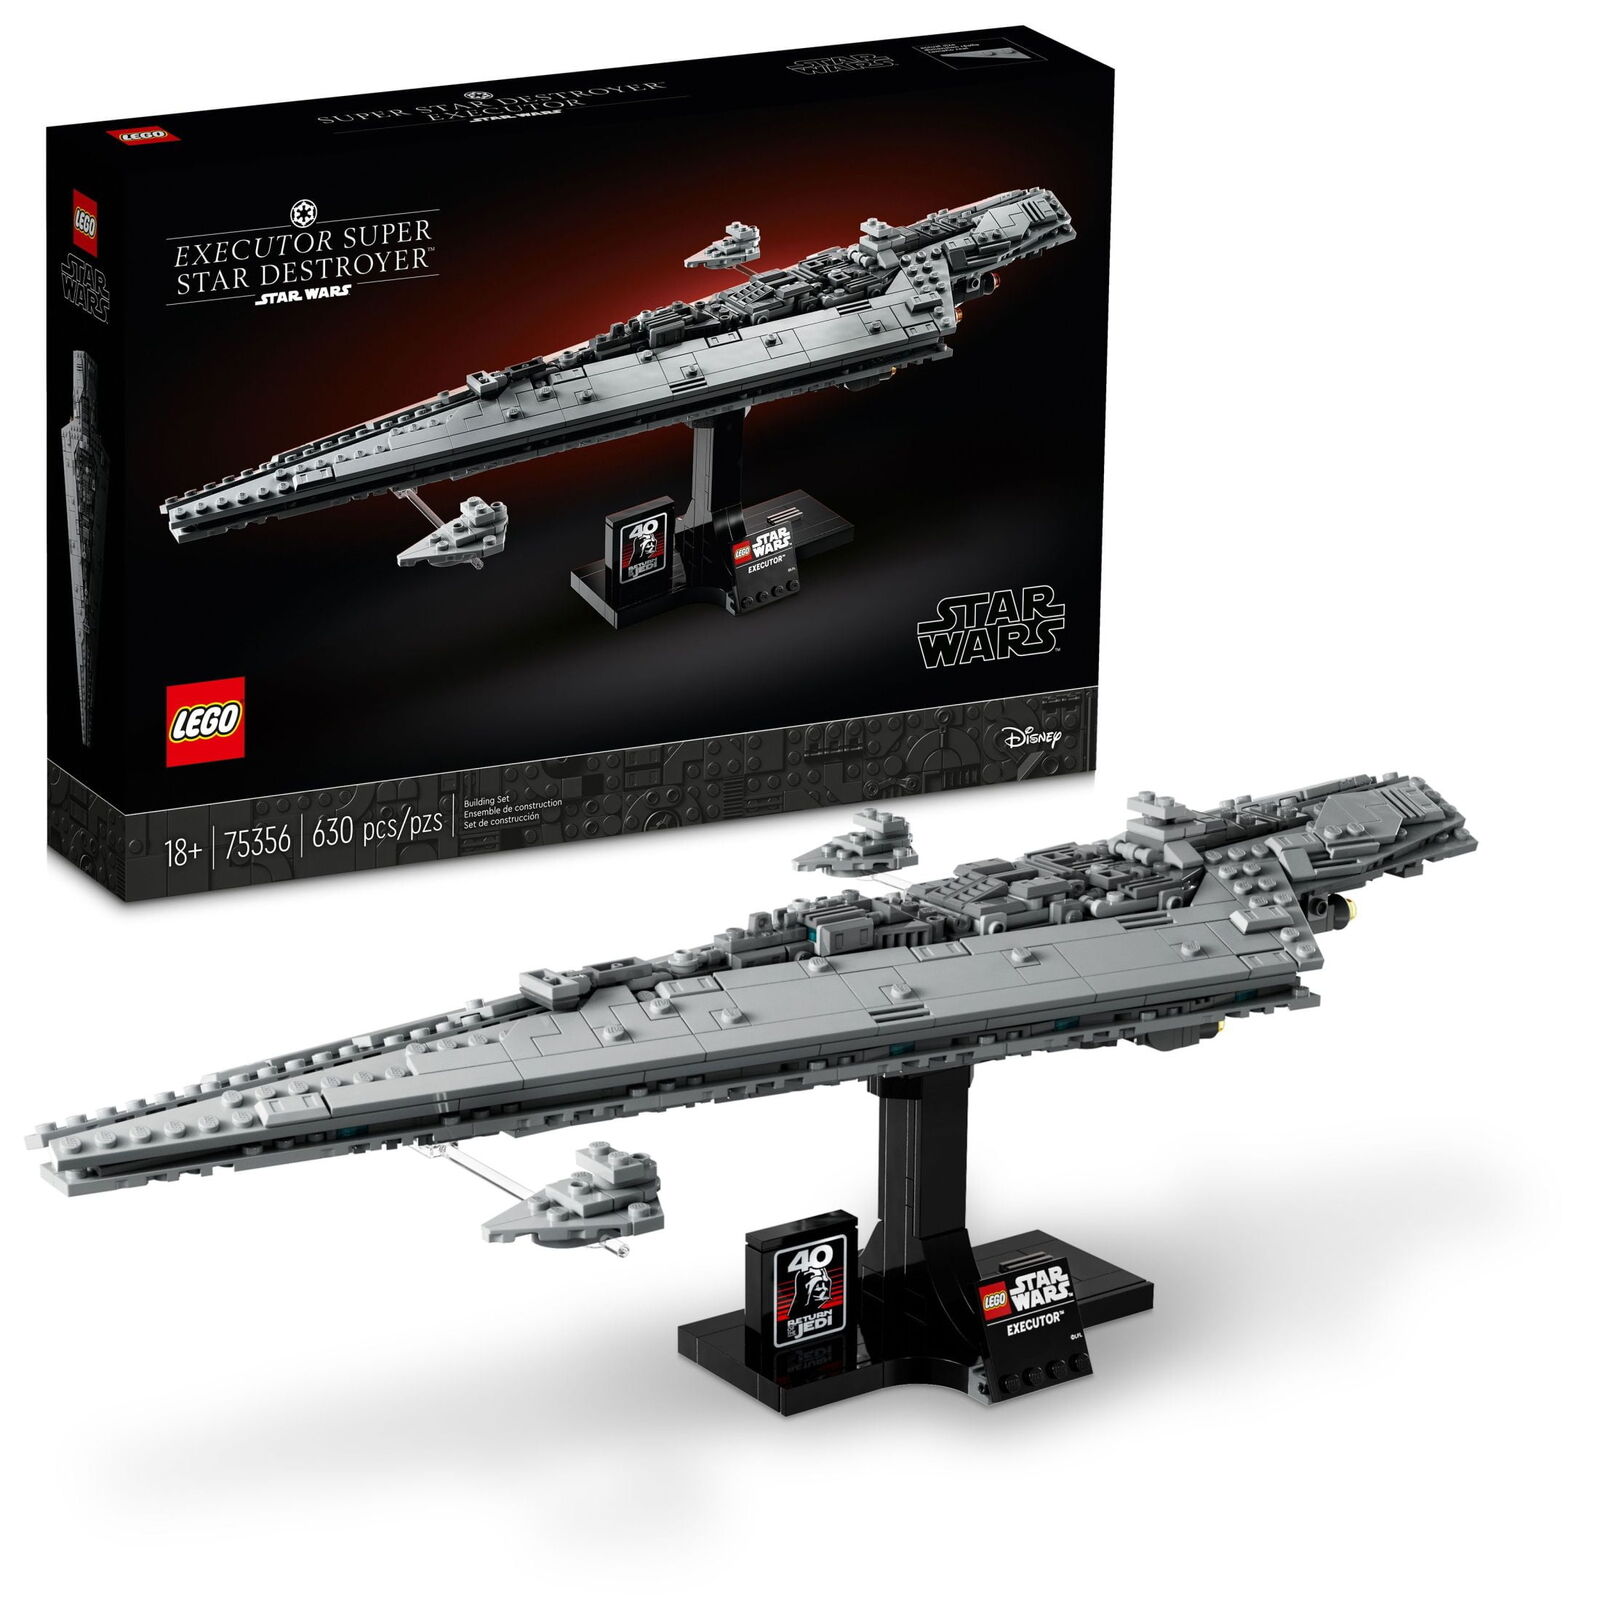 LEGO Star Wars Executor Super Star Destroyer 75356Star Wars Gift for May the 4th